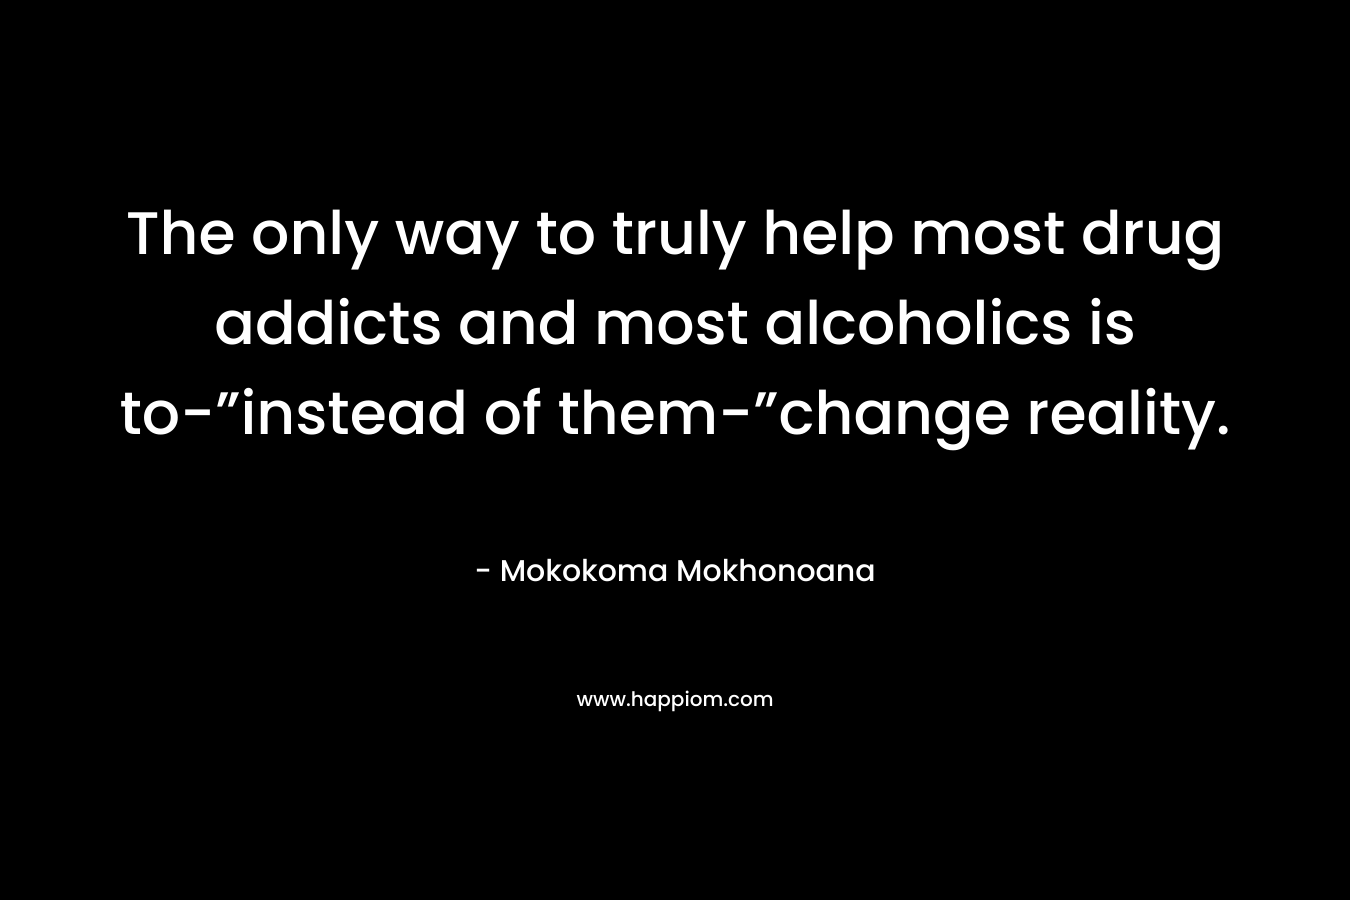 The only way to truly help most drug addicts and most alcoholics is to-”instead of them-”change reality. – Mokokoma Mokhonoana